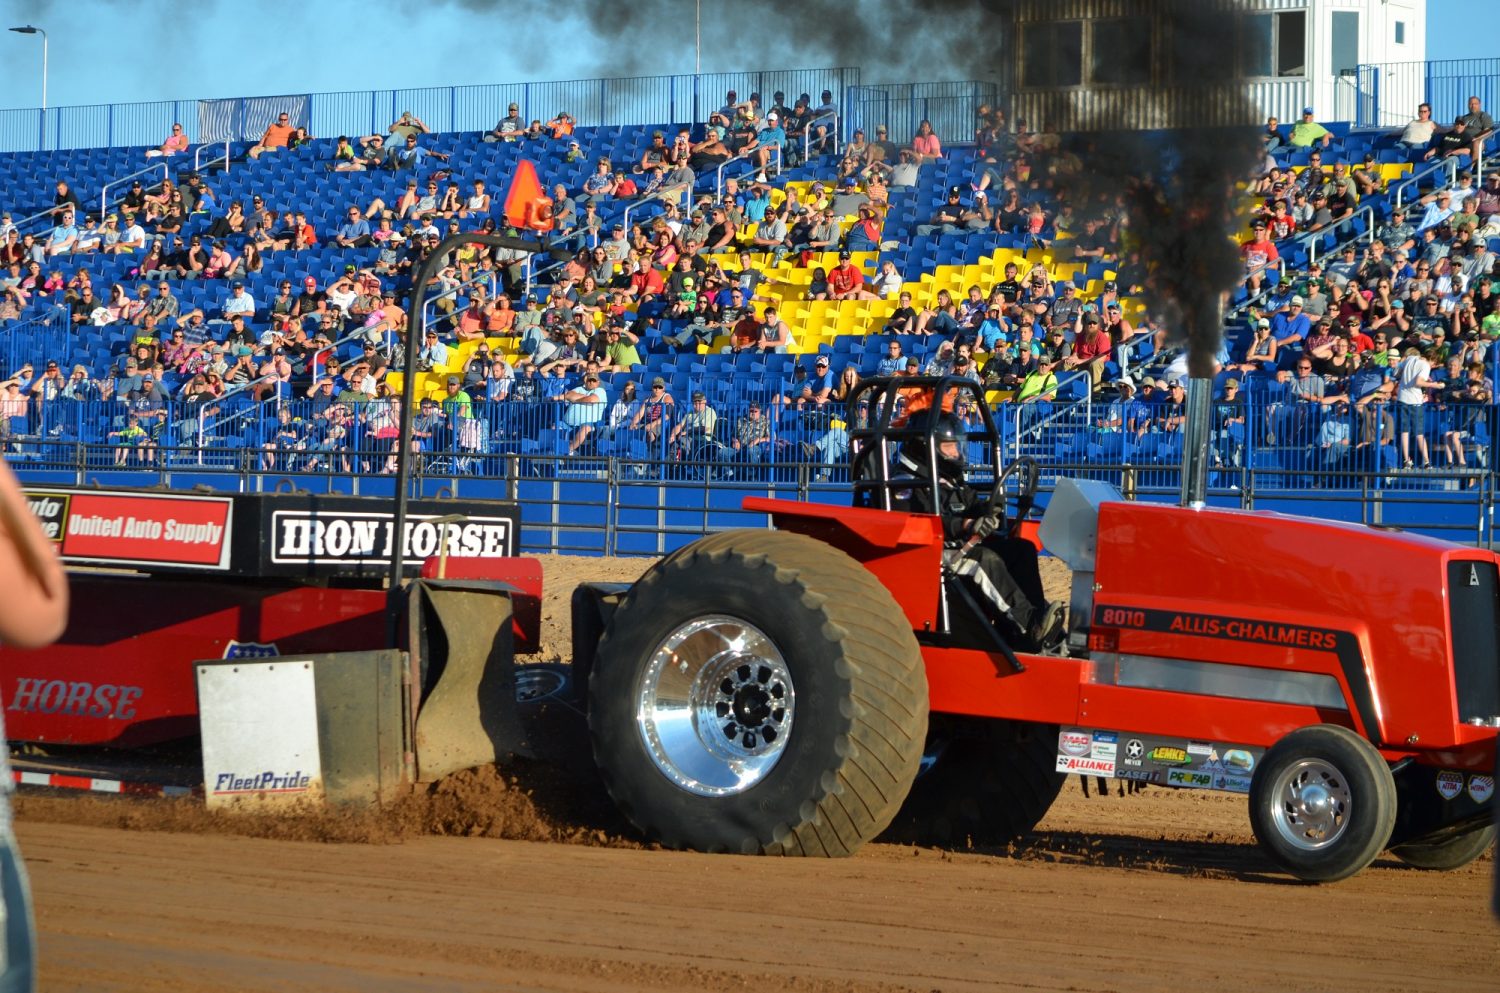 2nd Annual Tractor Pull pounds the Festival Grounds